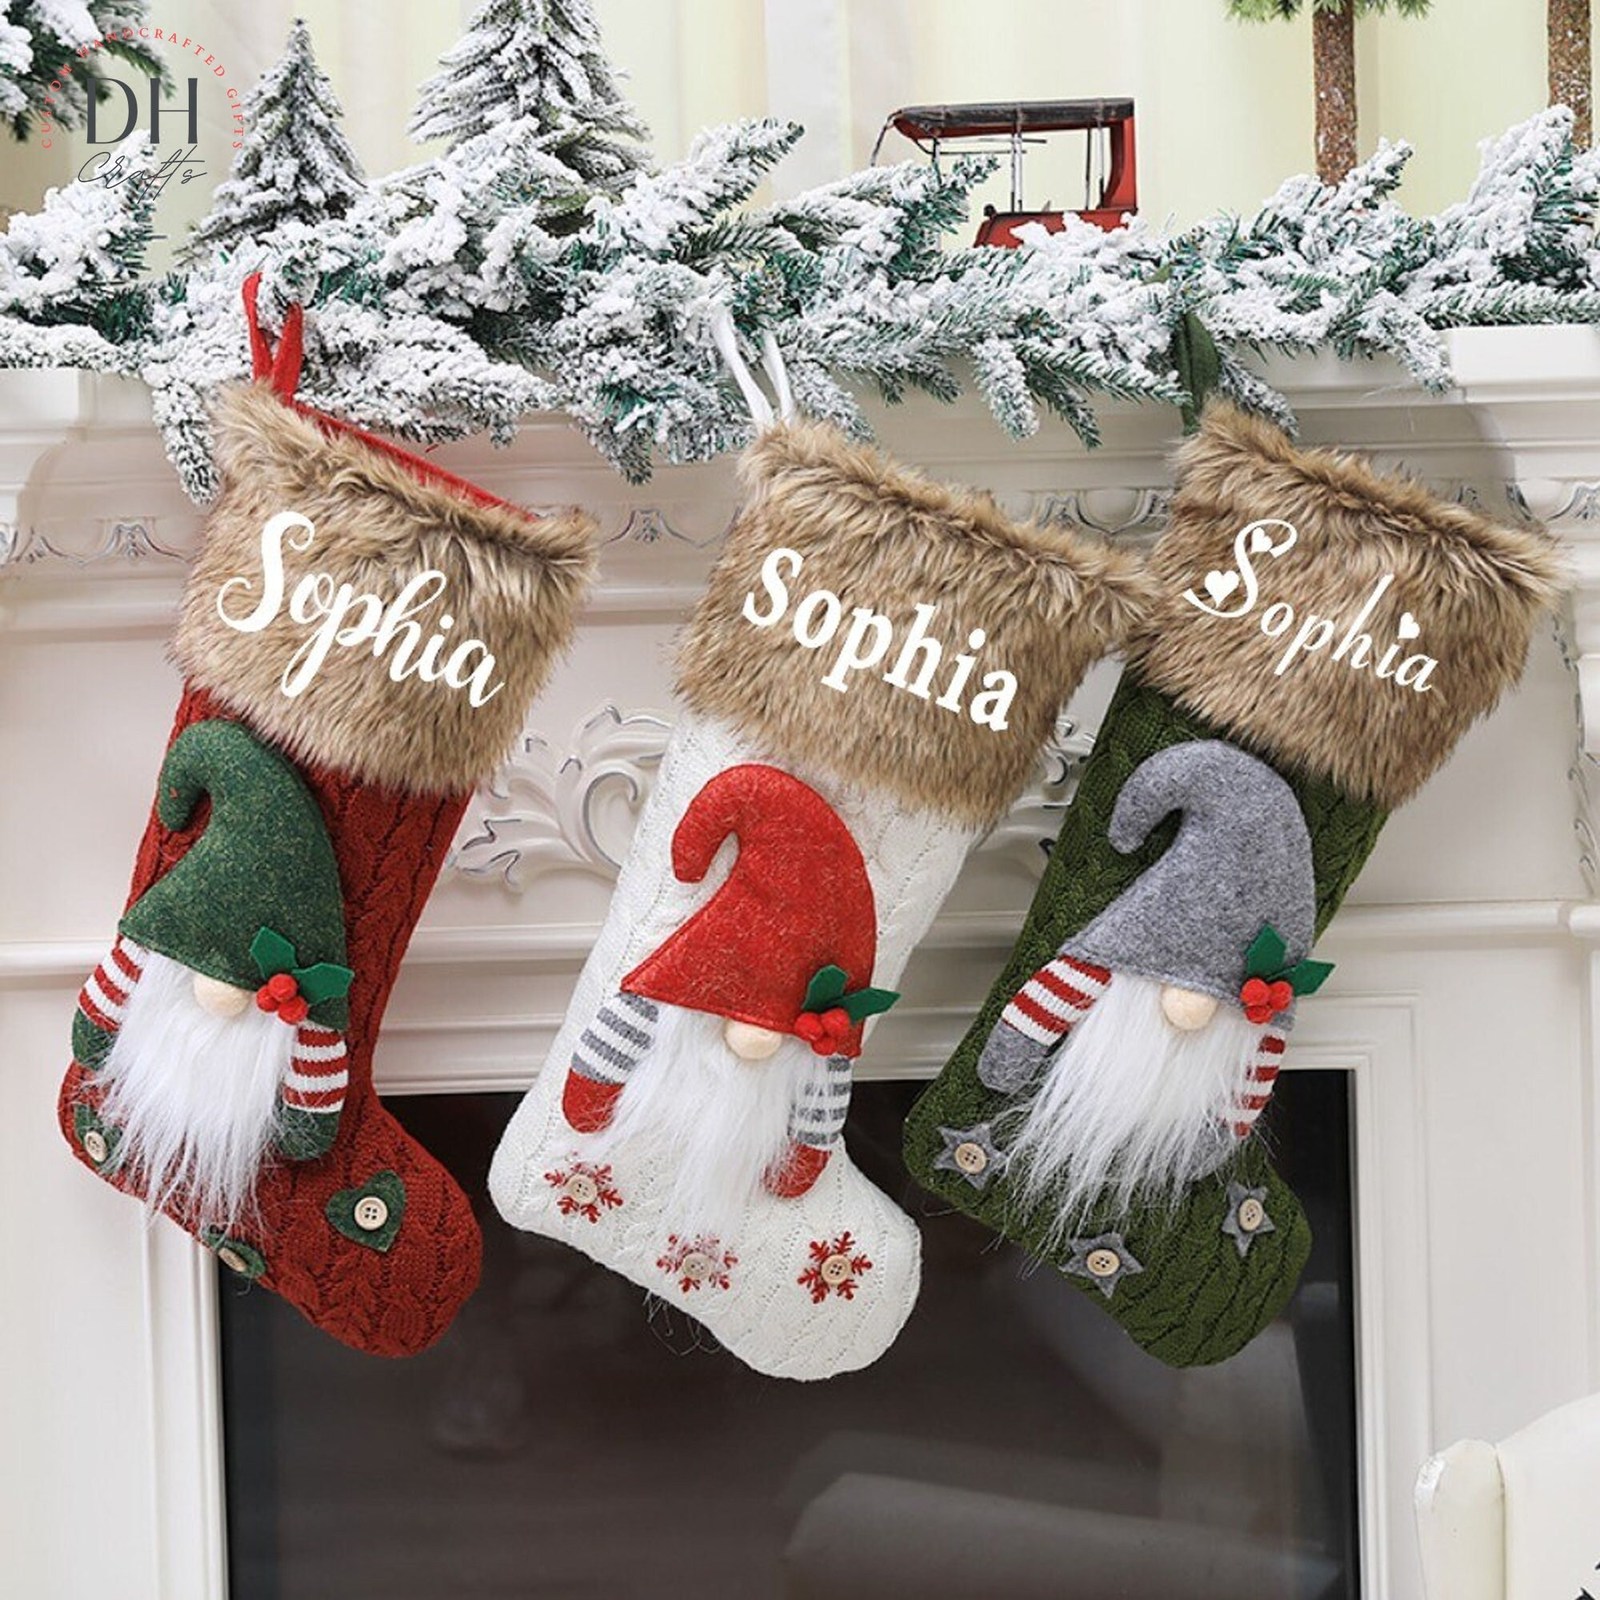 Large Christmas Personalized Family Stocking, Custom Gifts for Family and friend - $19.95 - $24.95